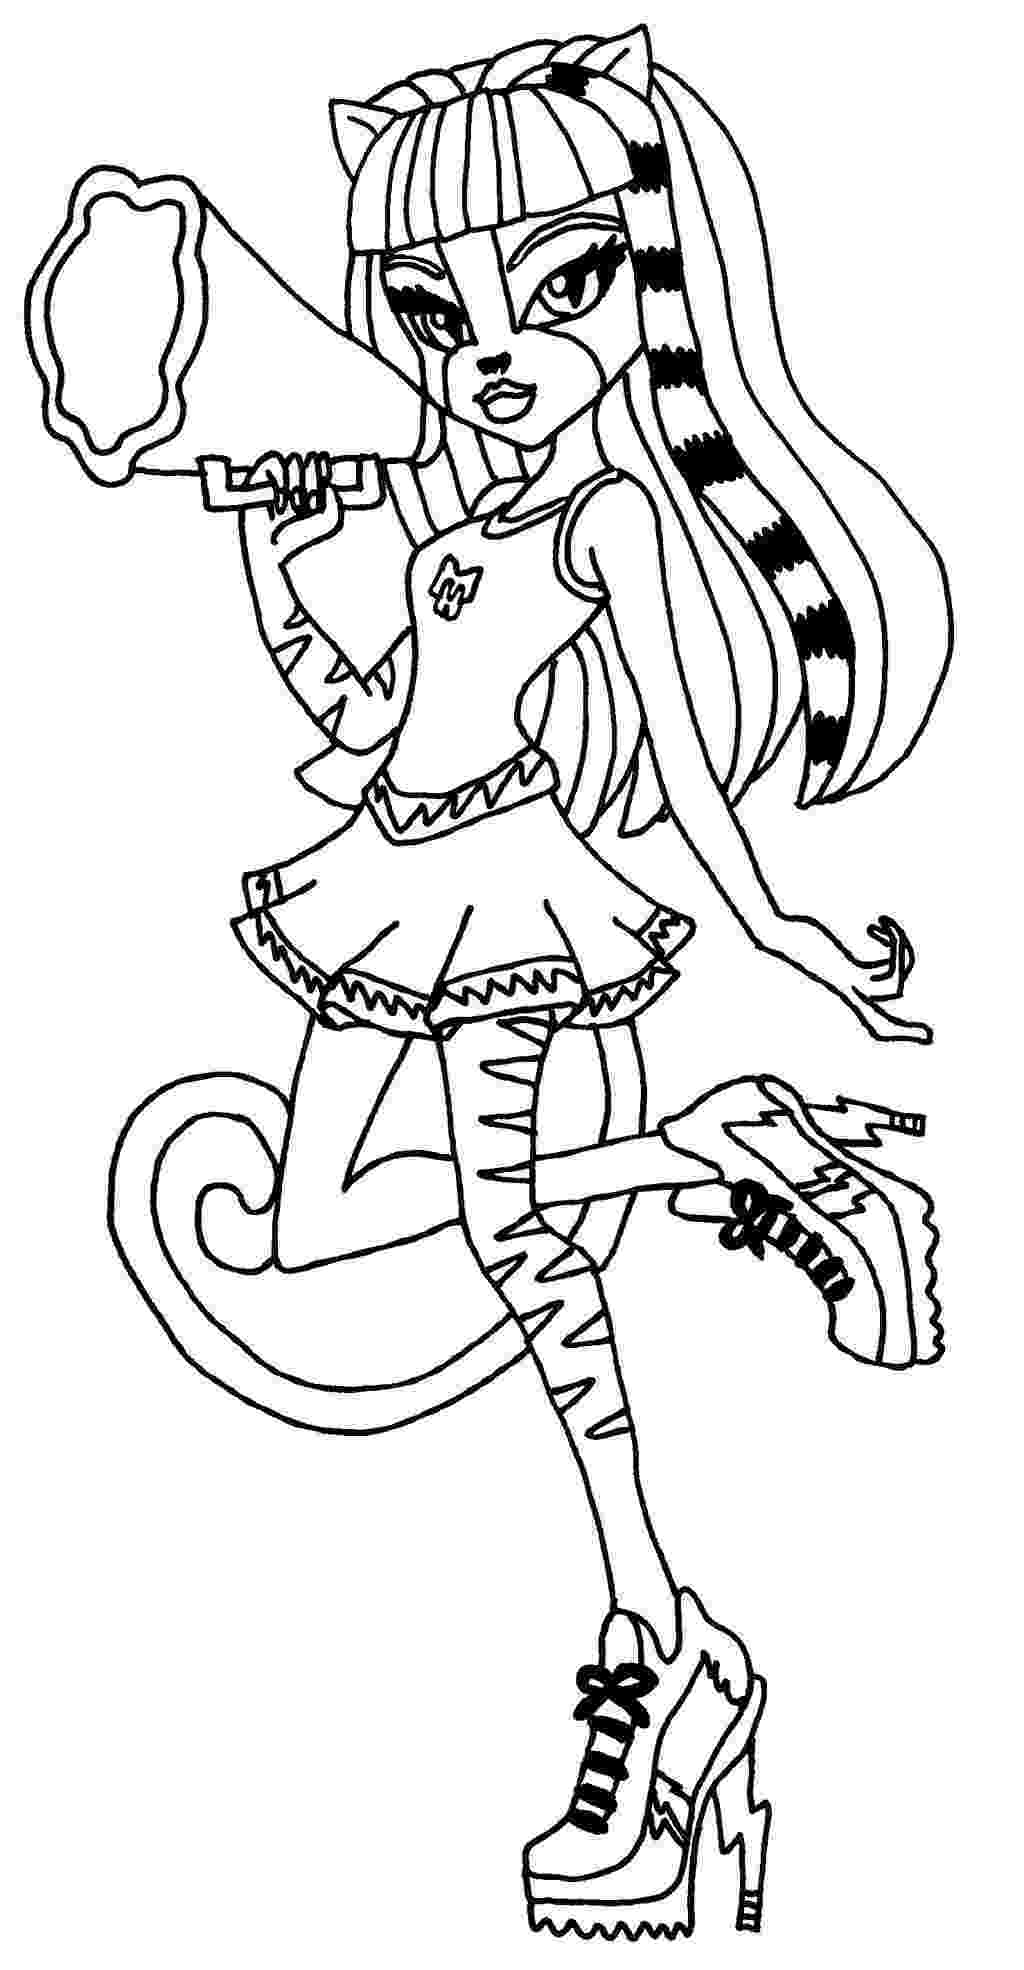 monster high coloring pages printables coloring pages monster high page 2 printable coloring pages coloring monster printables high 